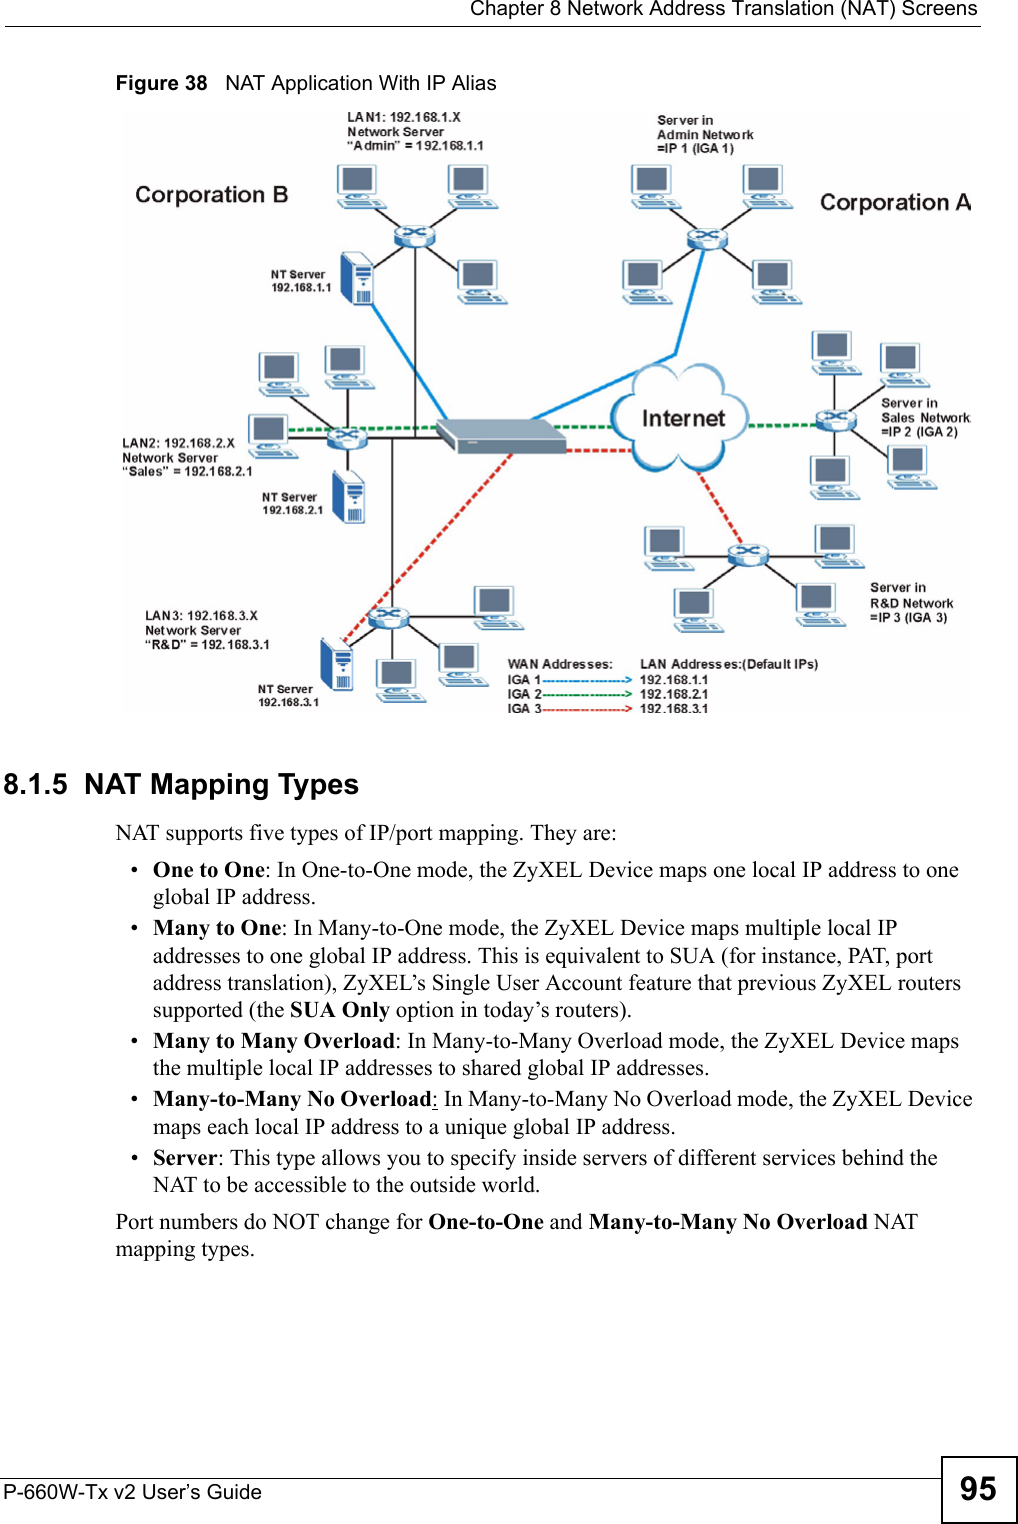  Chapter 8 Network Address Translation (NAT) ScreensP-660W-Tx v2 User’s Guide 95Figure 38   NAT Application With IP Alias8.1.5  NAT Mapping TypesNAT supports five types of IP/port mapping. They are:•One to One: In One-to-One mode, the ZyXEL Device maps one local IP address to one global IP address.•Many to One: In Many-to-One mode, the ZyXEL Device maps multiple local IP addresses to one global IP address. This is equivalent to SUA (for instance, PAT, port address translation), ZyXEL’s Single User Account feature that previous ZyXEL routers supported (the SUA Only option in today’s routers). •Many to Many Overload: In Many-to-Many Overload mode, the ZyXEL Device maps the multiple local IP addresses to shared global IP addresses.•Many-to-Many No Overload: In Many-to-Many No Overload mode, the ZyXEL Device maps each local IP address to a unique global IP address. •Server: This type allows you to specify inside servers of different services behind the NAT to be accessible to the outside world.Port numbers do NOT change for One-to-One and Many-to-Many No Overload NAT mapping types. 